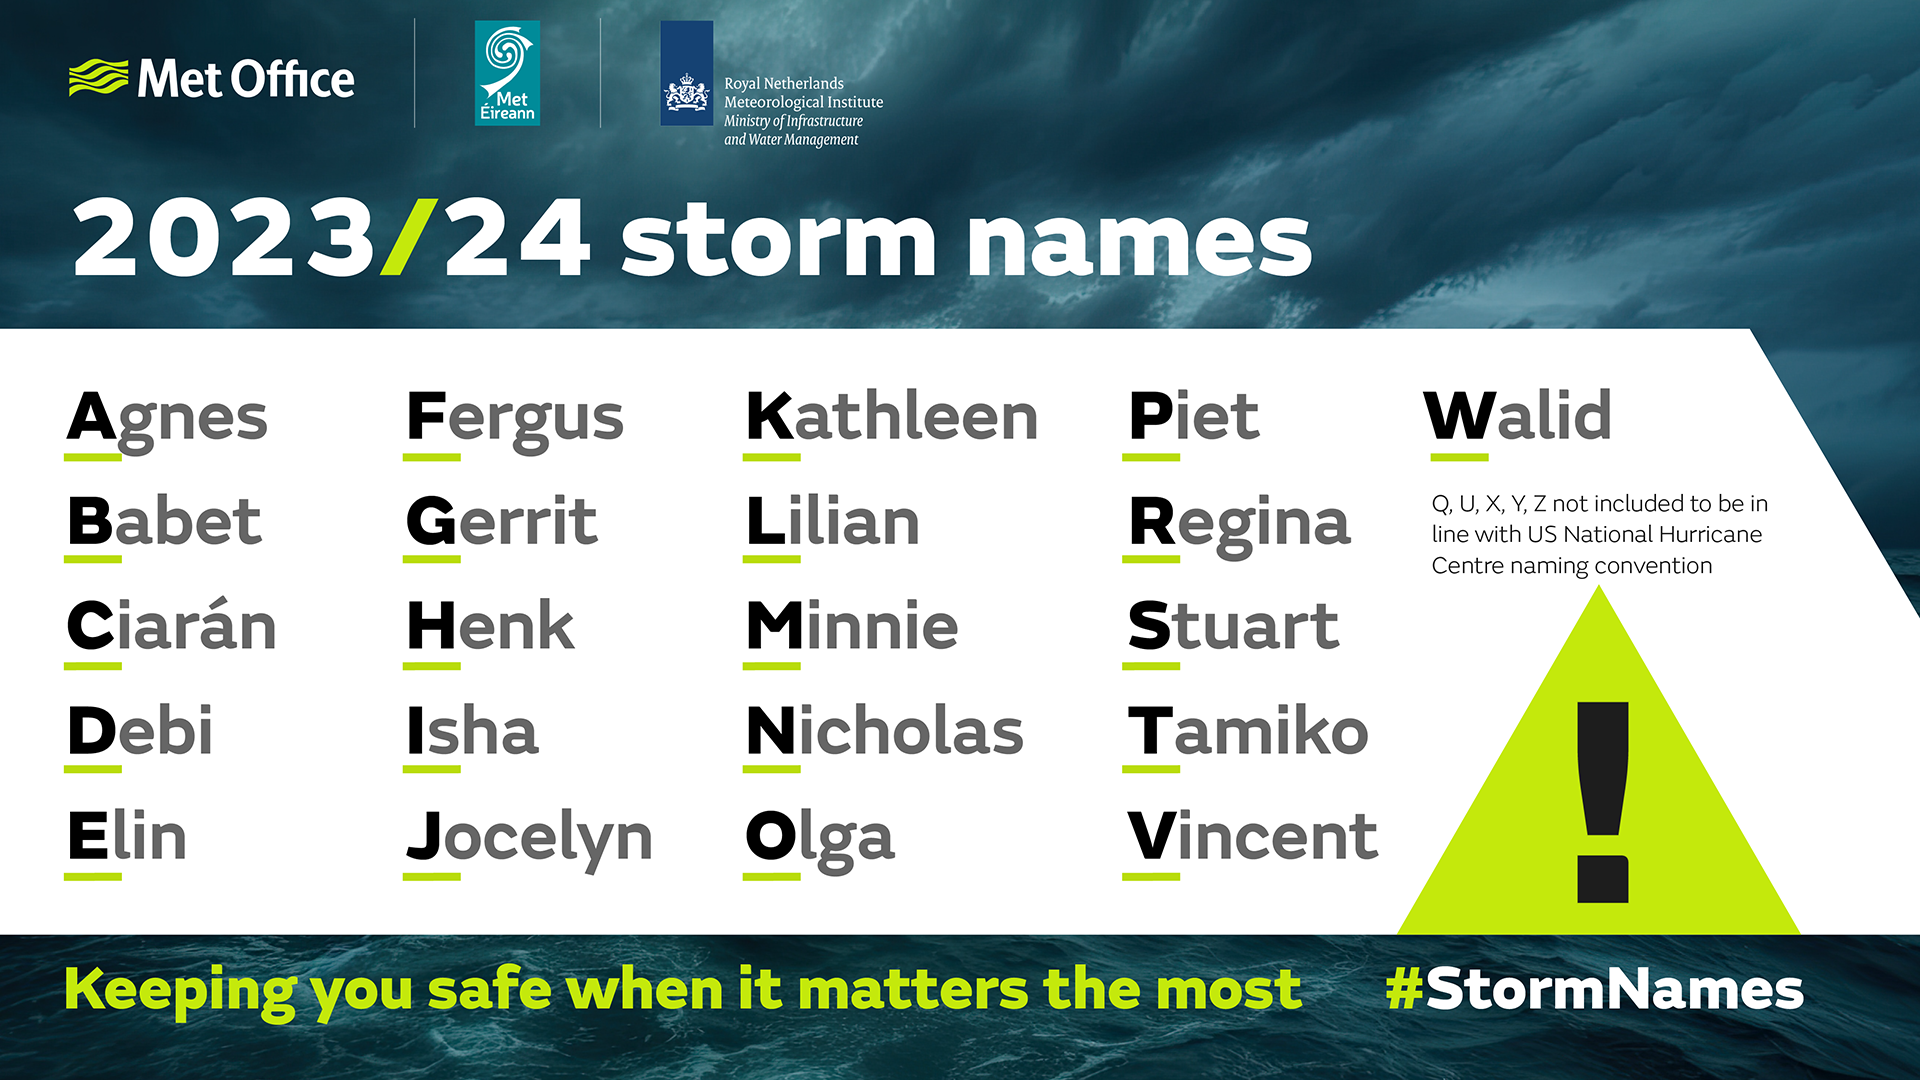 2023/24 storm names from Met Office, Met Eireann and KNMI. Agnes, Babet, Ciaran, Debi, Elin, Fergus, Gerrit, Henk, Isha, Jocelyn, Kathleen, Lilian, Minnie, Nicholas, Olga, Piet, Regina, Stuart, Tamiko, Vincent, Walid. Q, U, X, Y and Z are not included to be in line with the US National Hurricane Centre naming convention. #StormNames